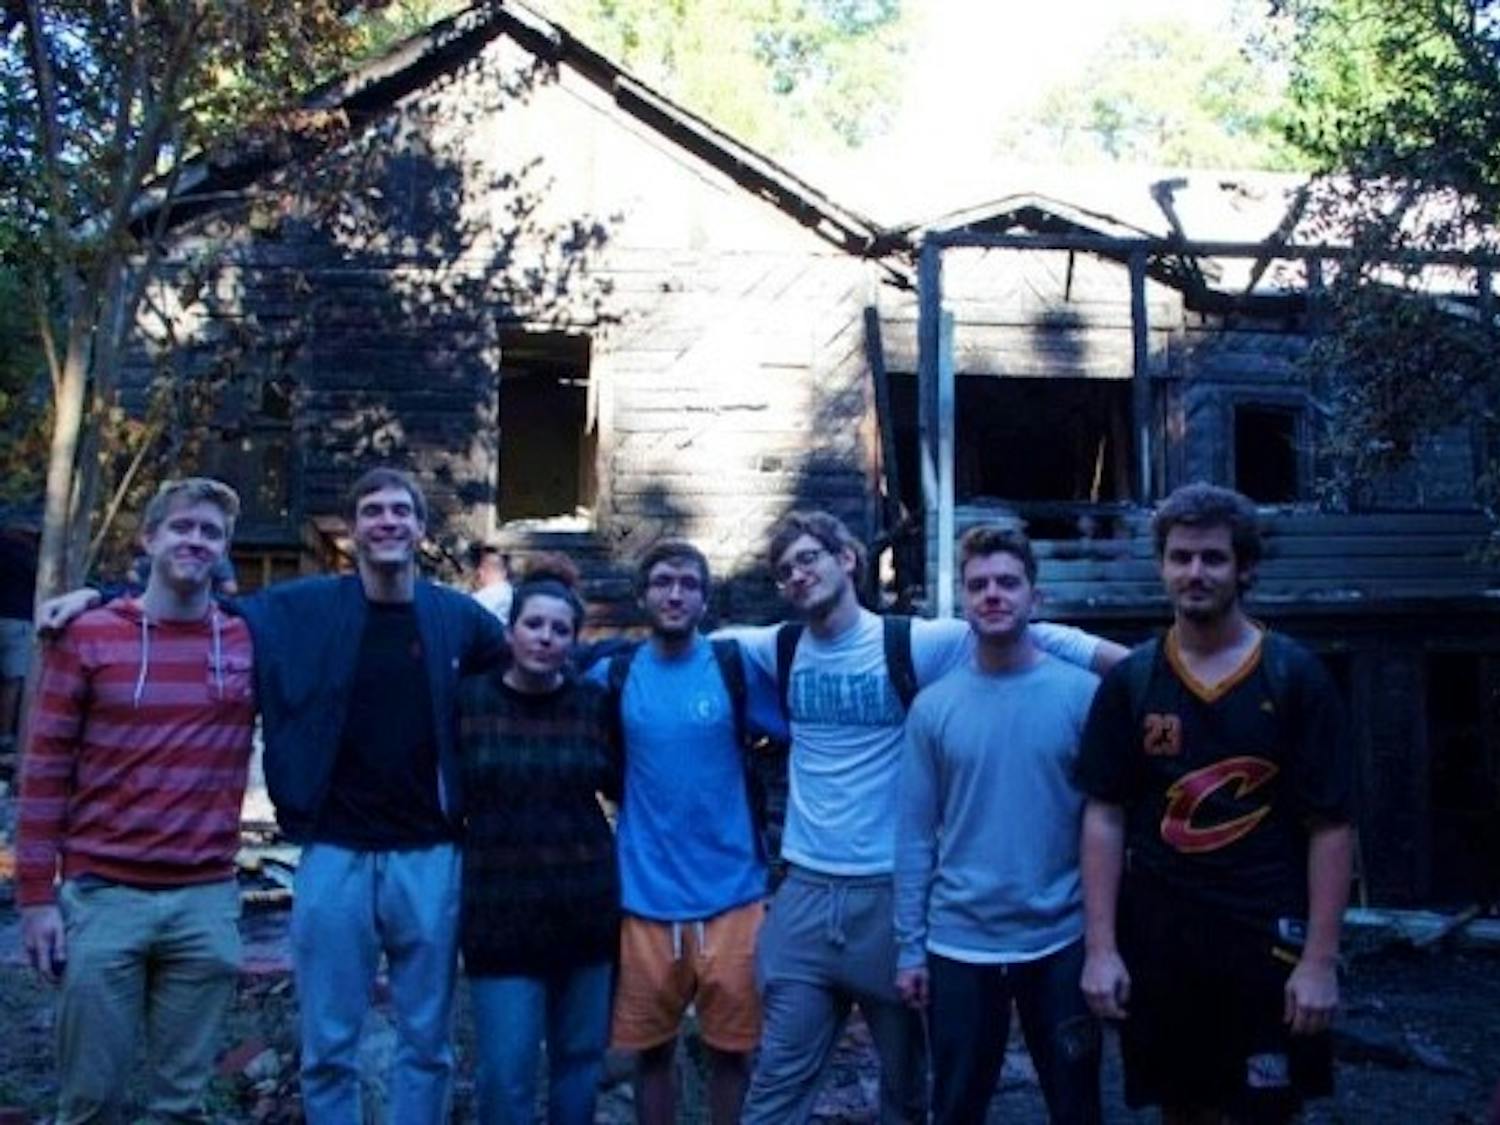 Residents of 416 Pittsboro Street pose in front of their house before it burned down. Photo courtesy of Sam Gault.